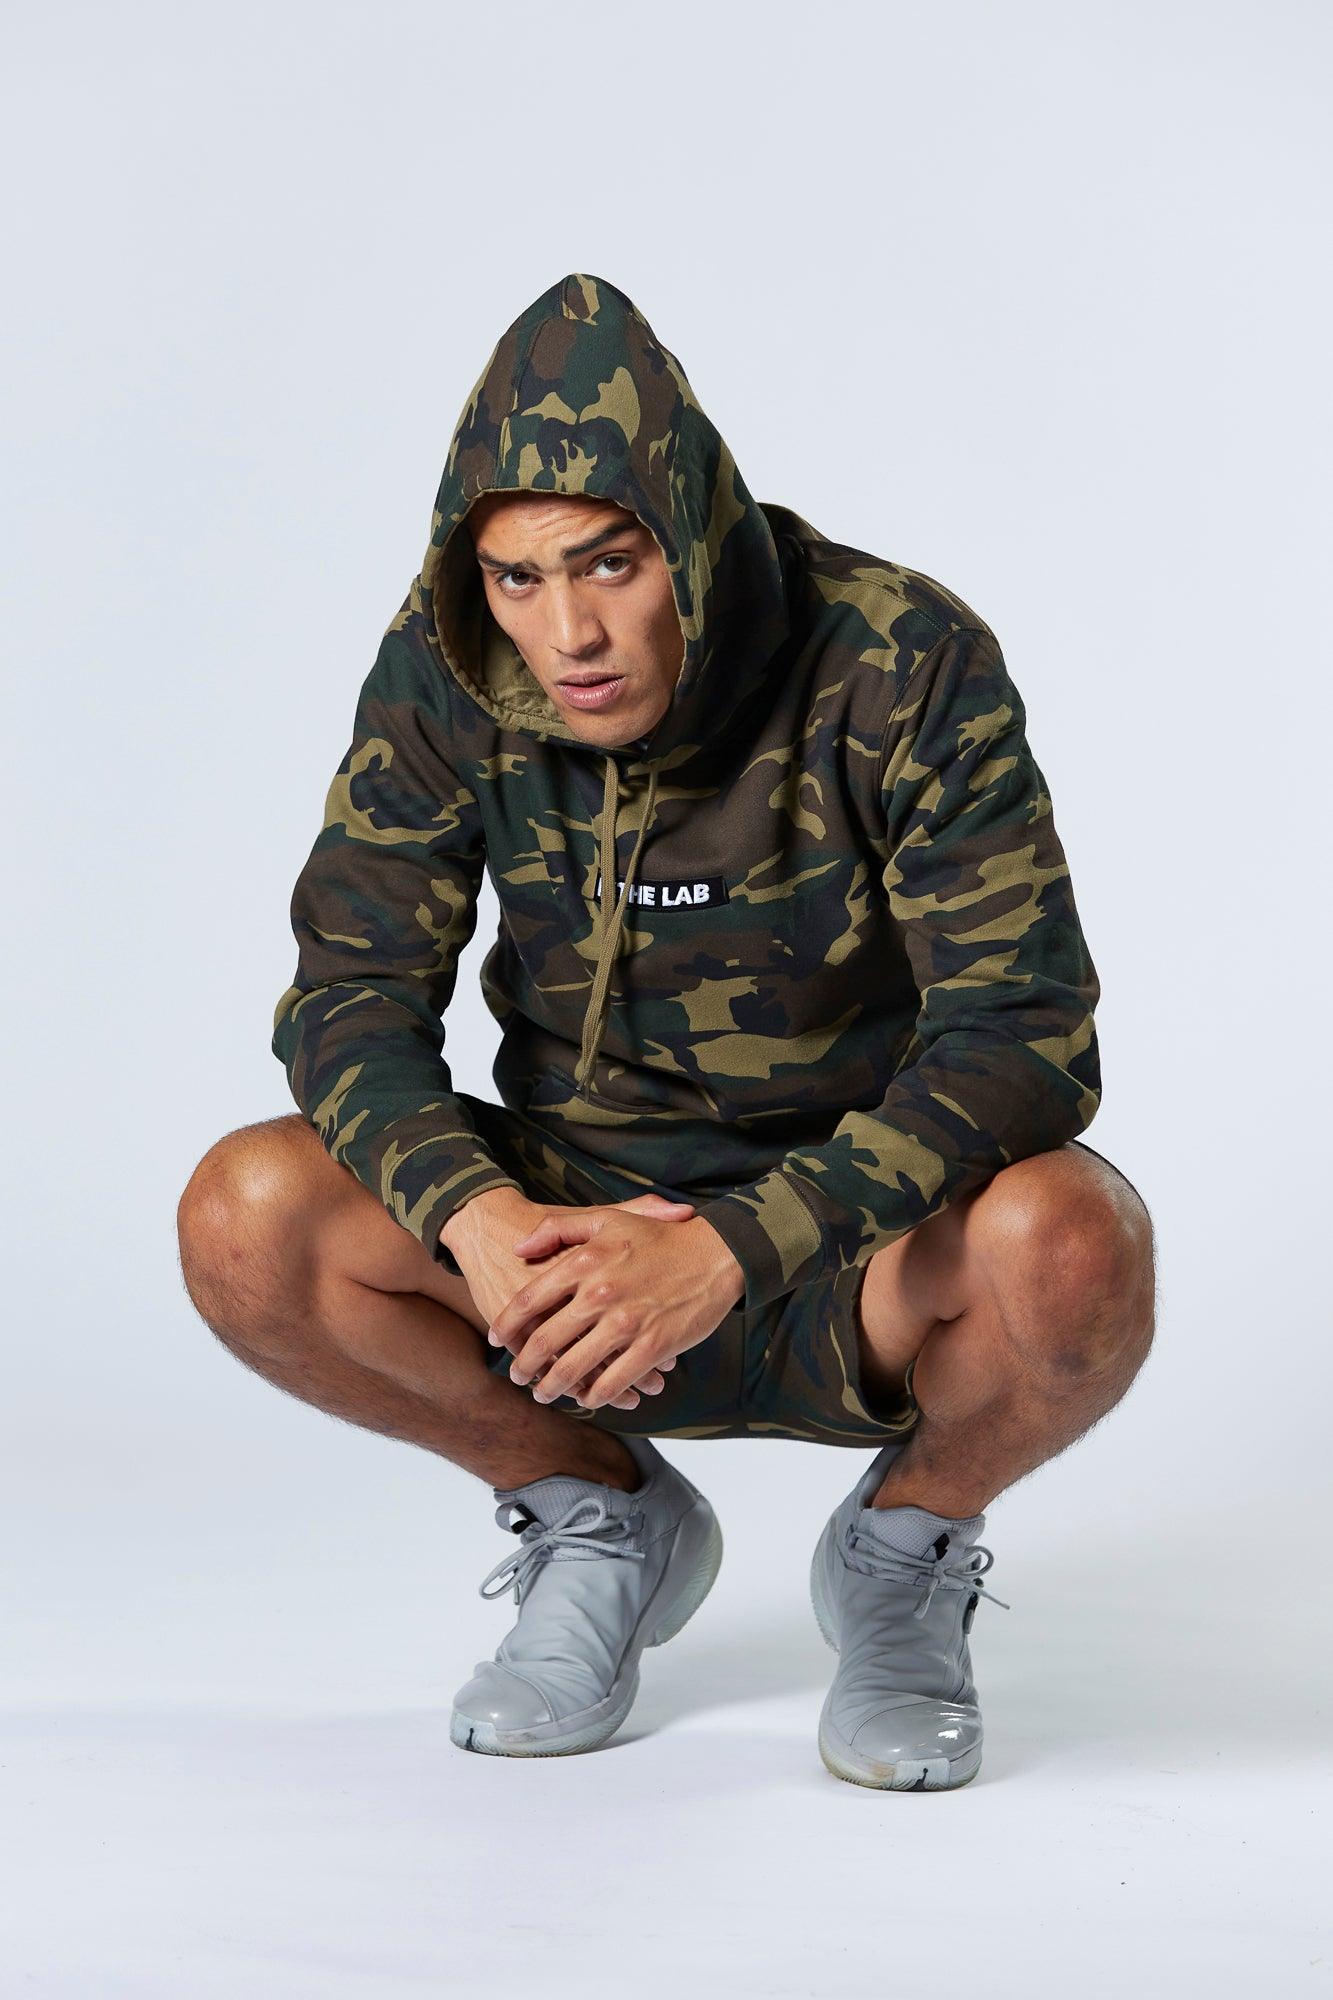 Forest Camo Staple Hoodie - In The Lab